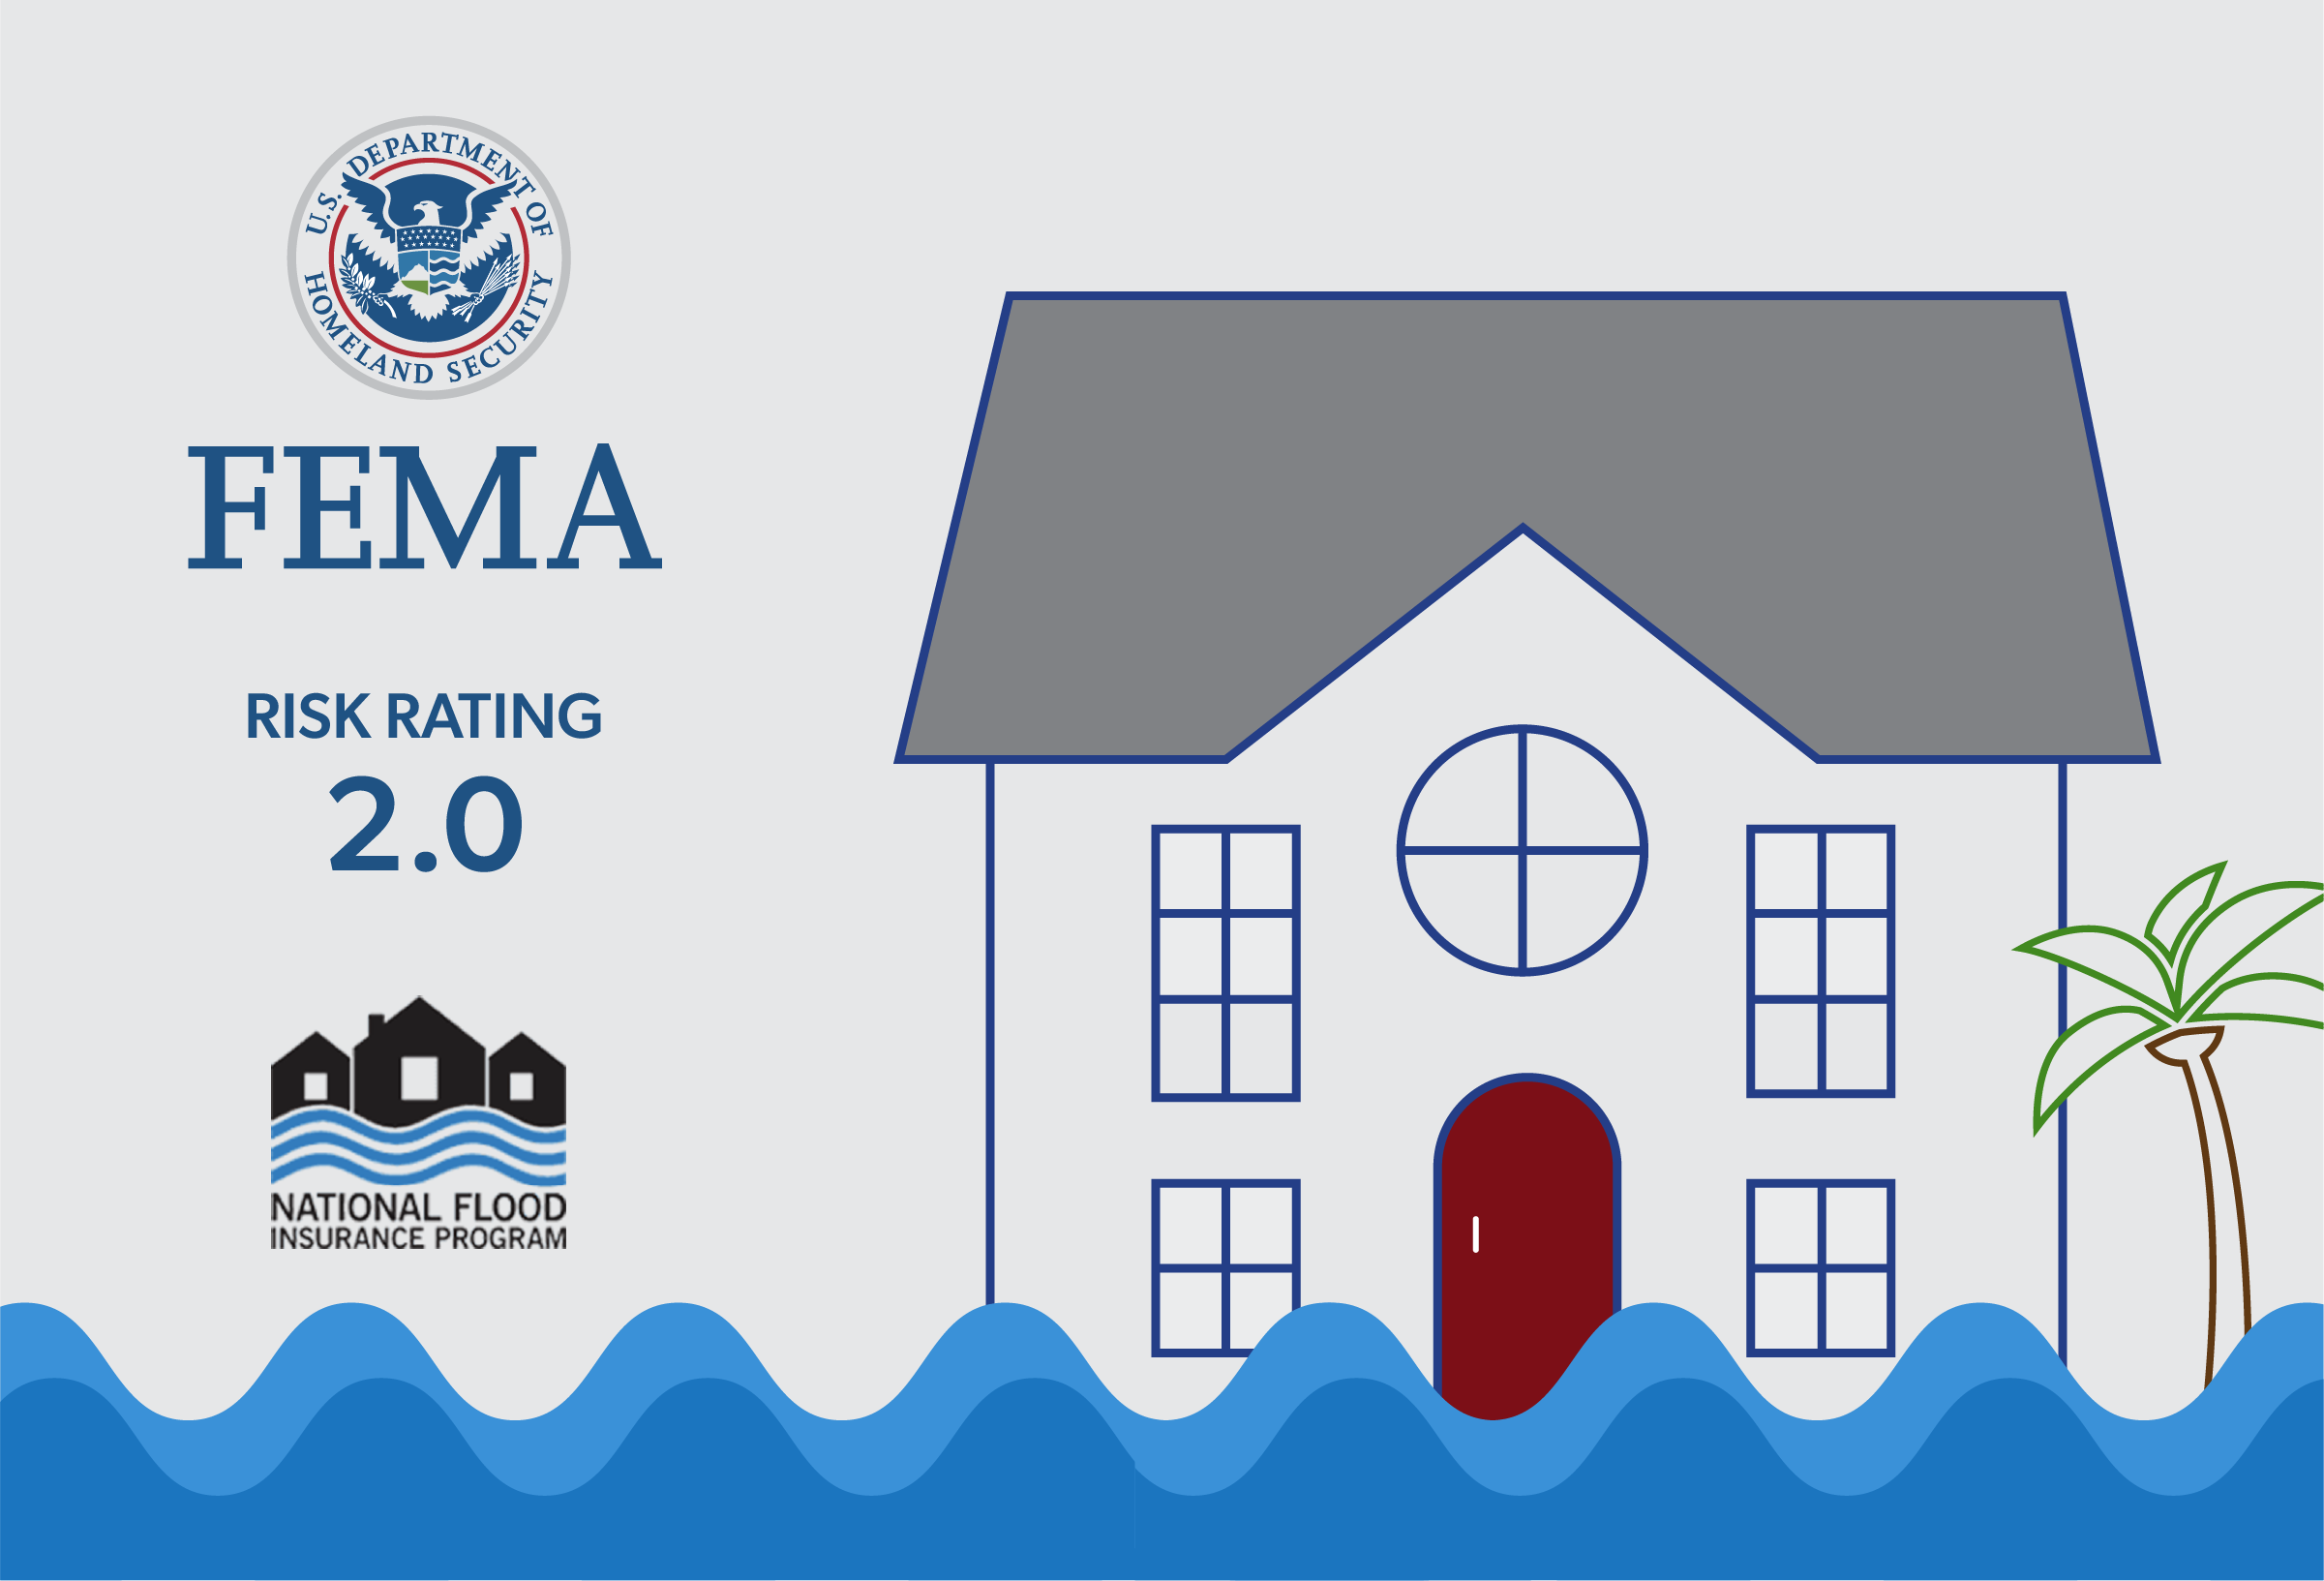 Leverage FEMA’s new Risk Rating 2.0 to generate business